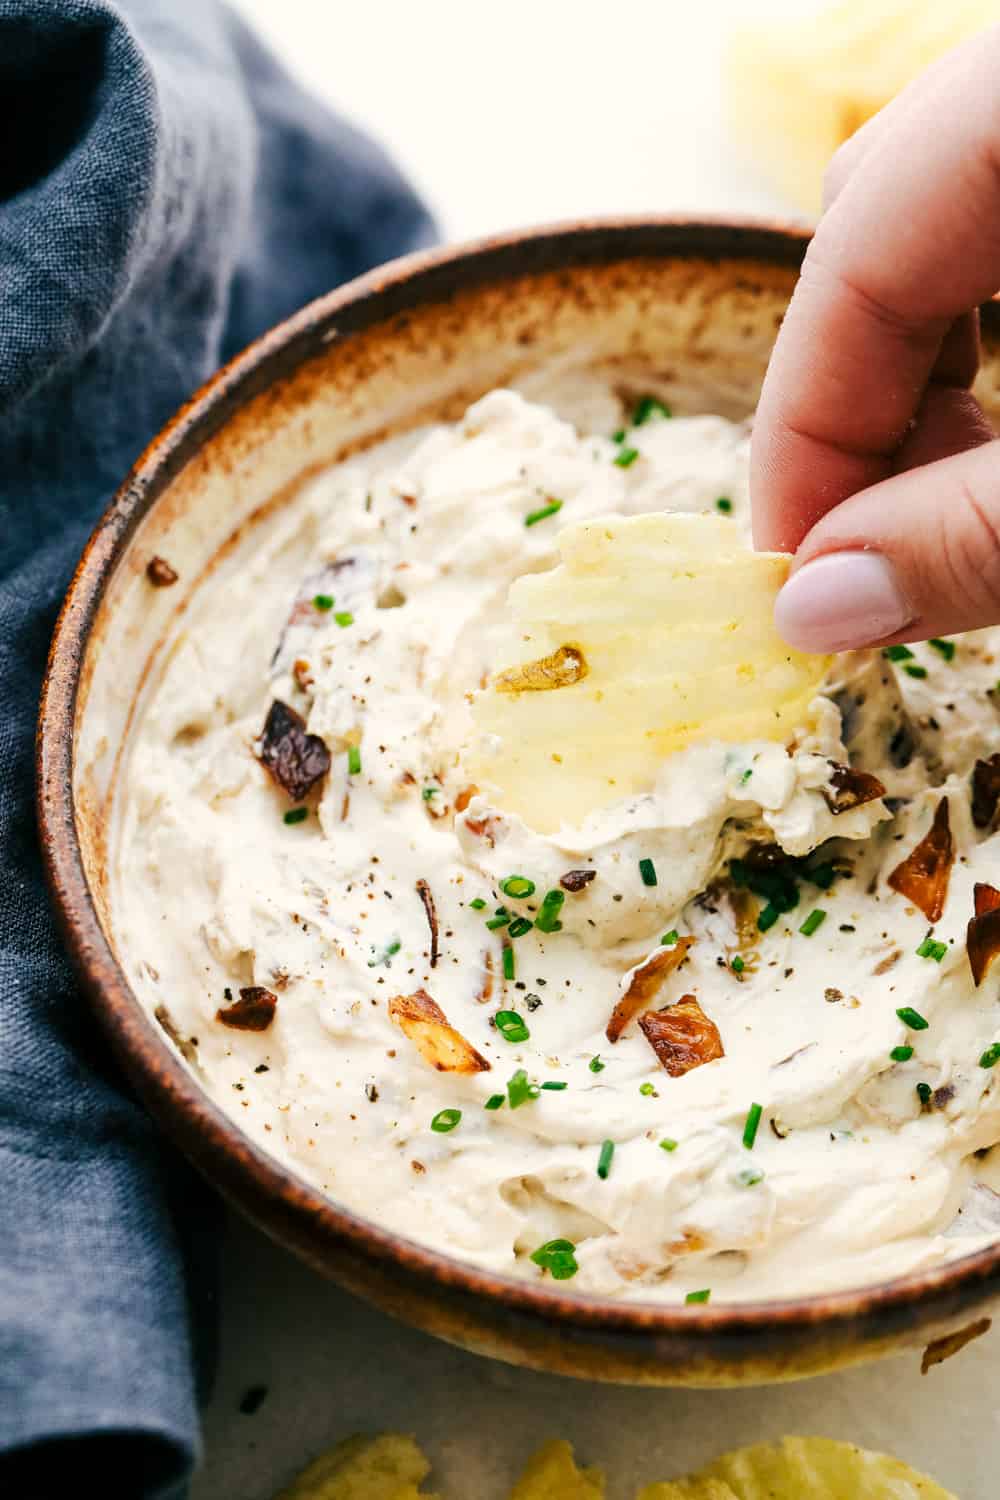 Dipping chips into the Best French Onion Dip.